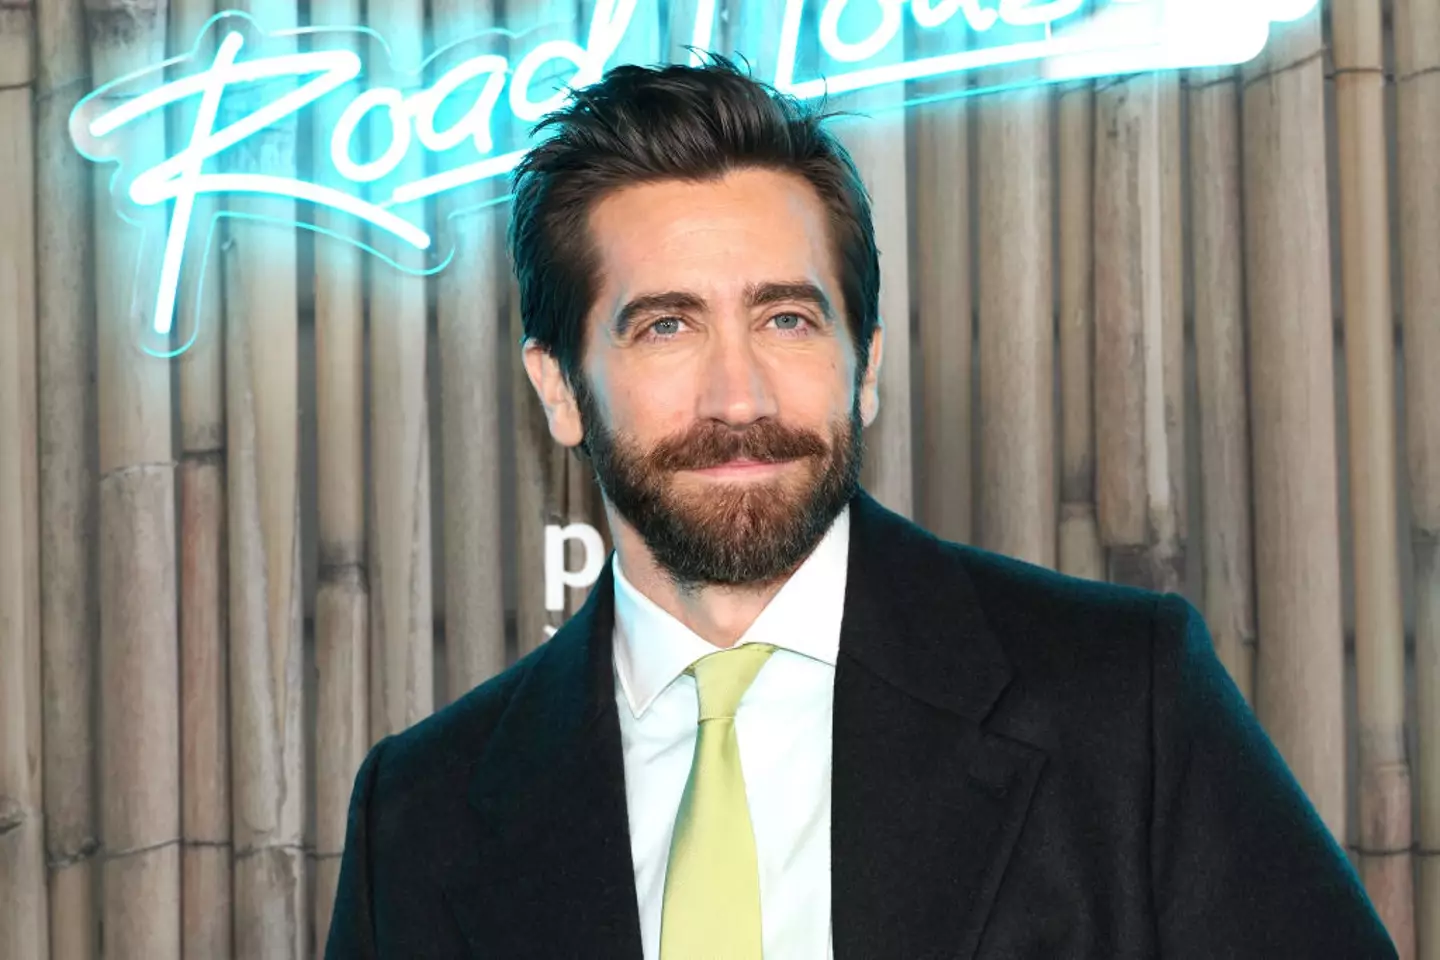 Jake Gyllenhaal might not smell as good as we'd hoped. (Dia Dipasupil/Getty Images)